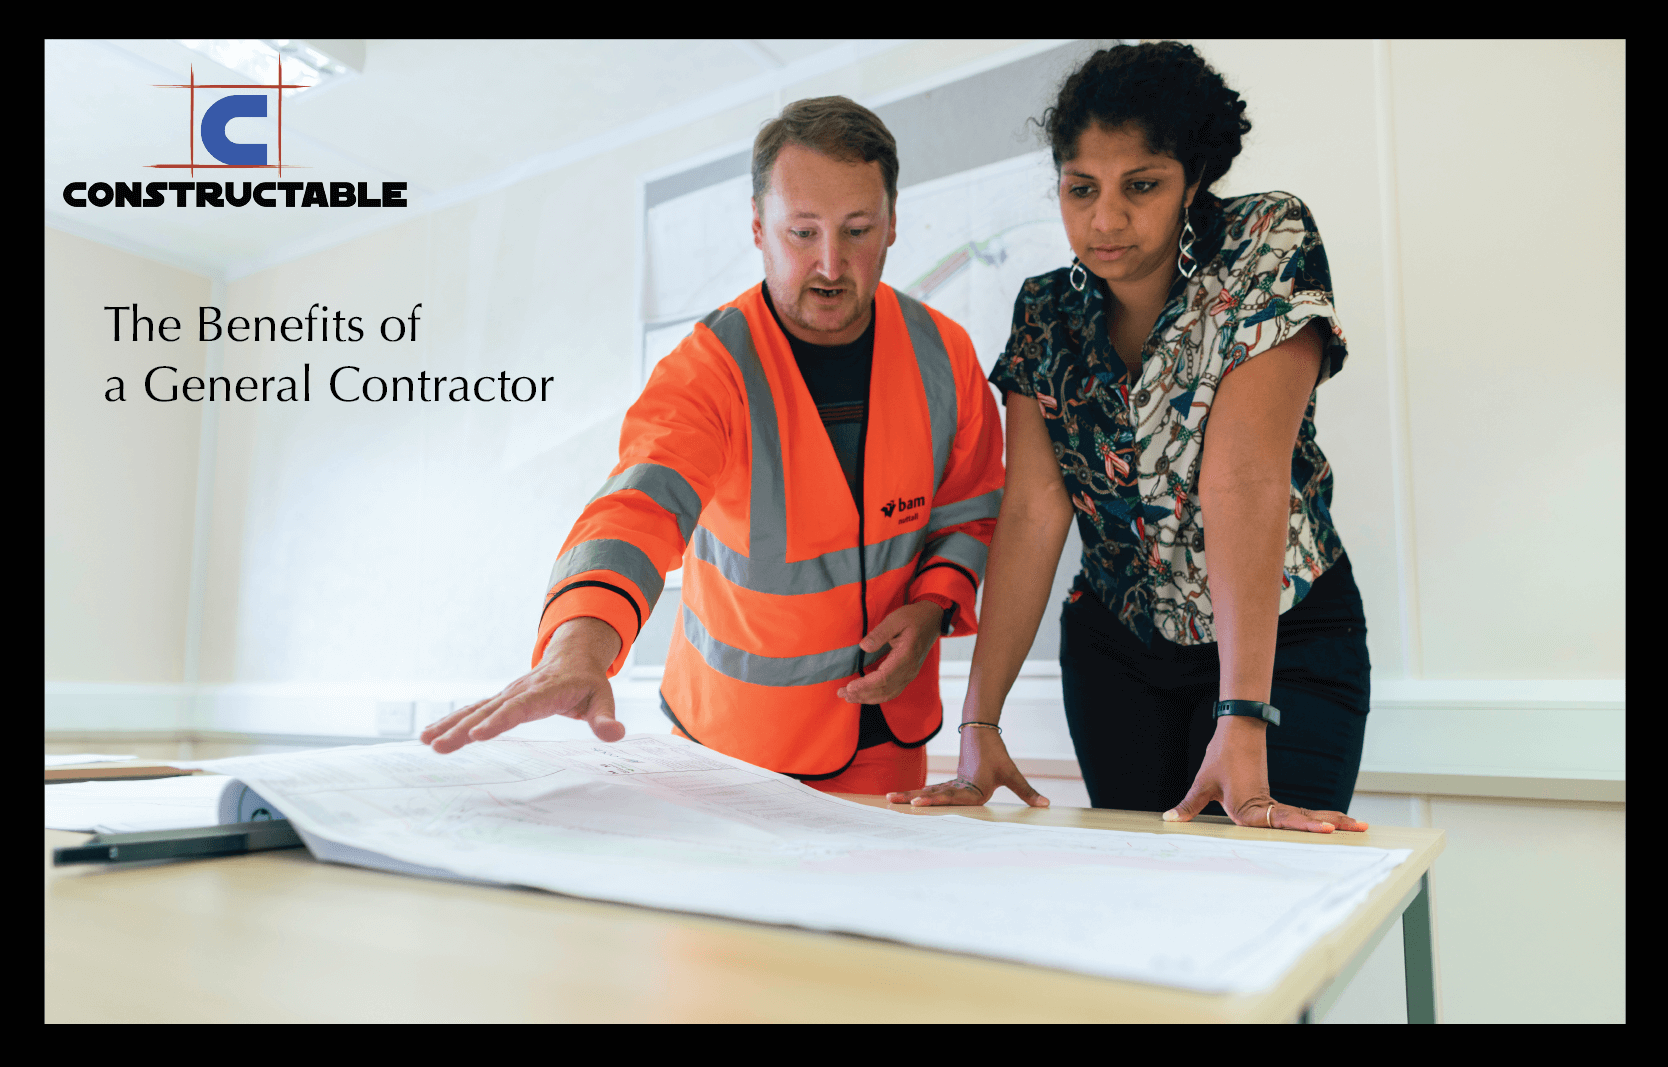 A man in a safety vest and a woman in a patterned blouse discussing over blueprints on a desk, with the logo and text "constructable: the advantages of a general contractor" at the